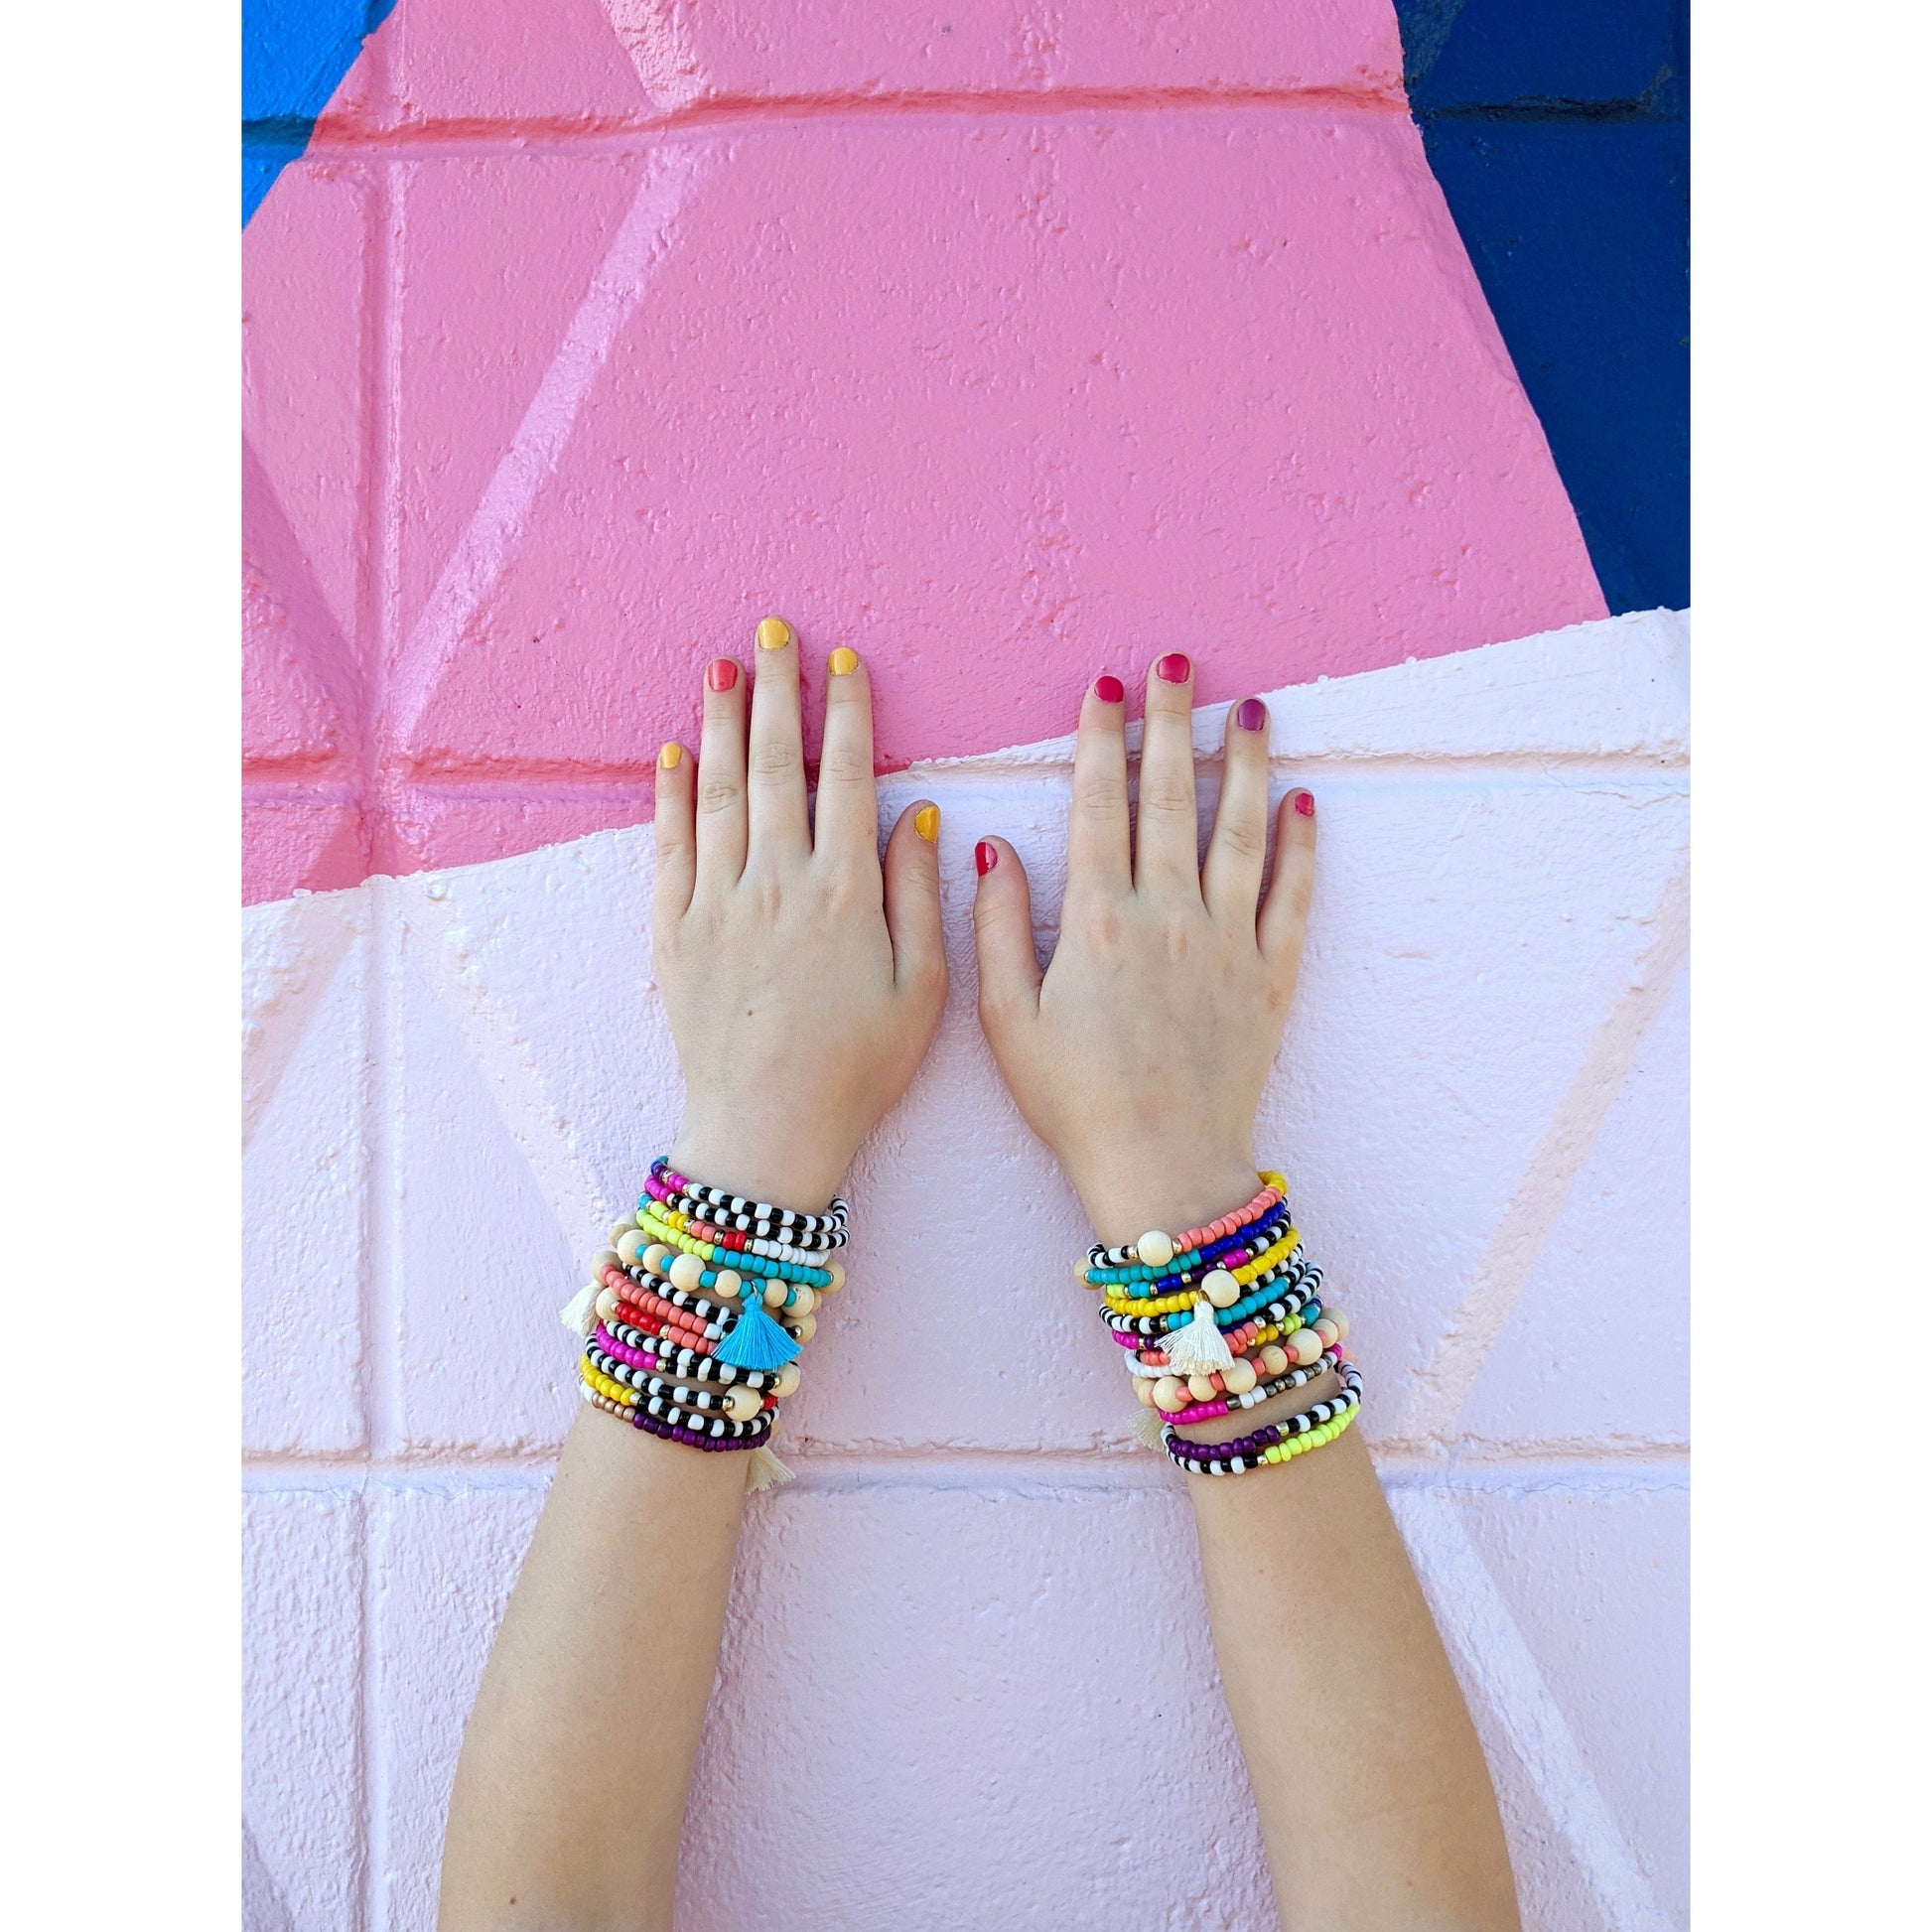 image shows two arms stretched up a wall with multiple, colourful, beaded bracelets on eaxh wrist